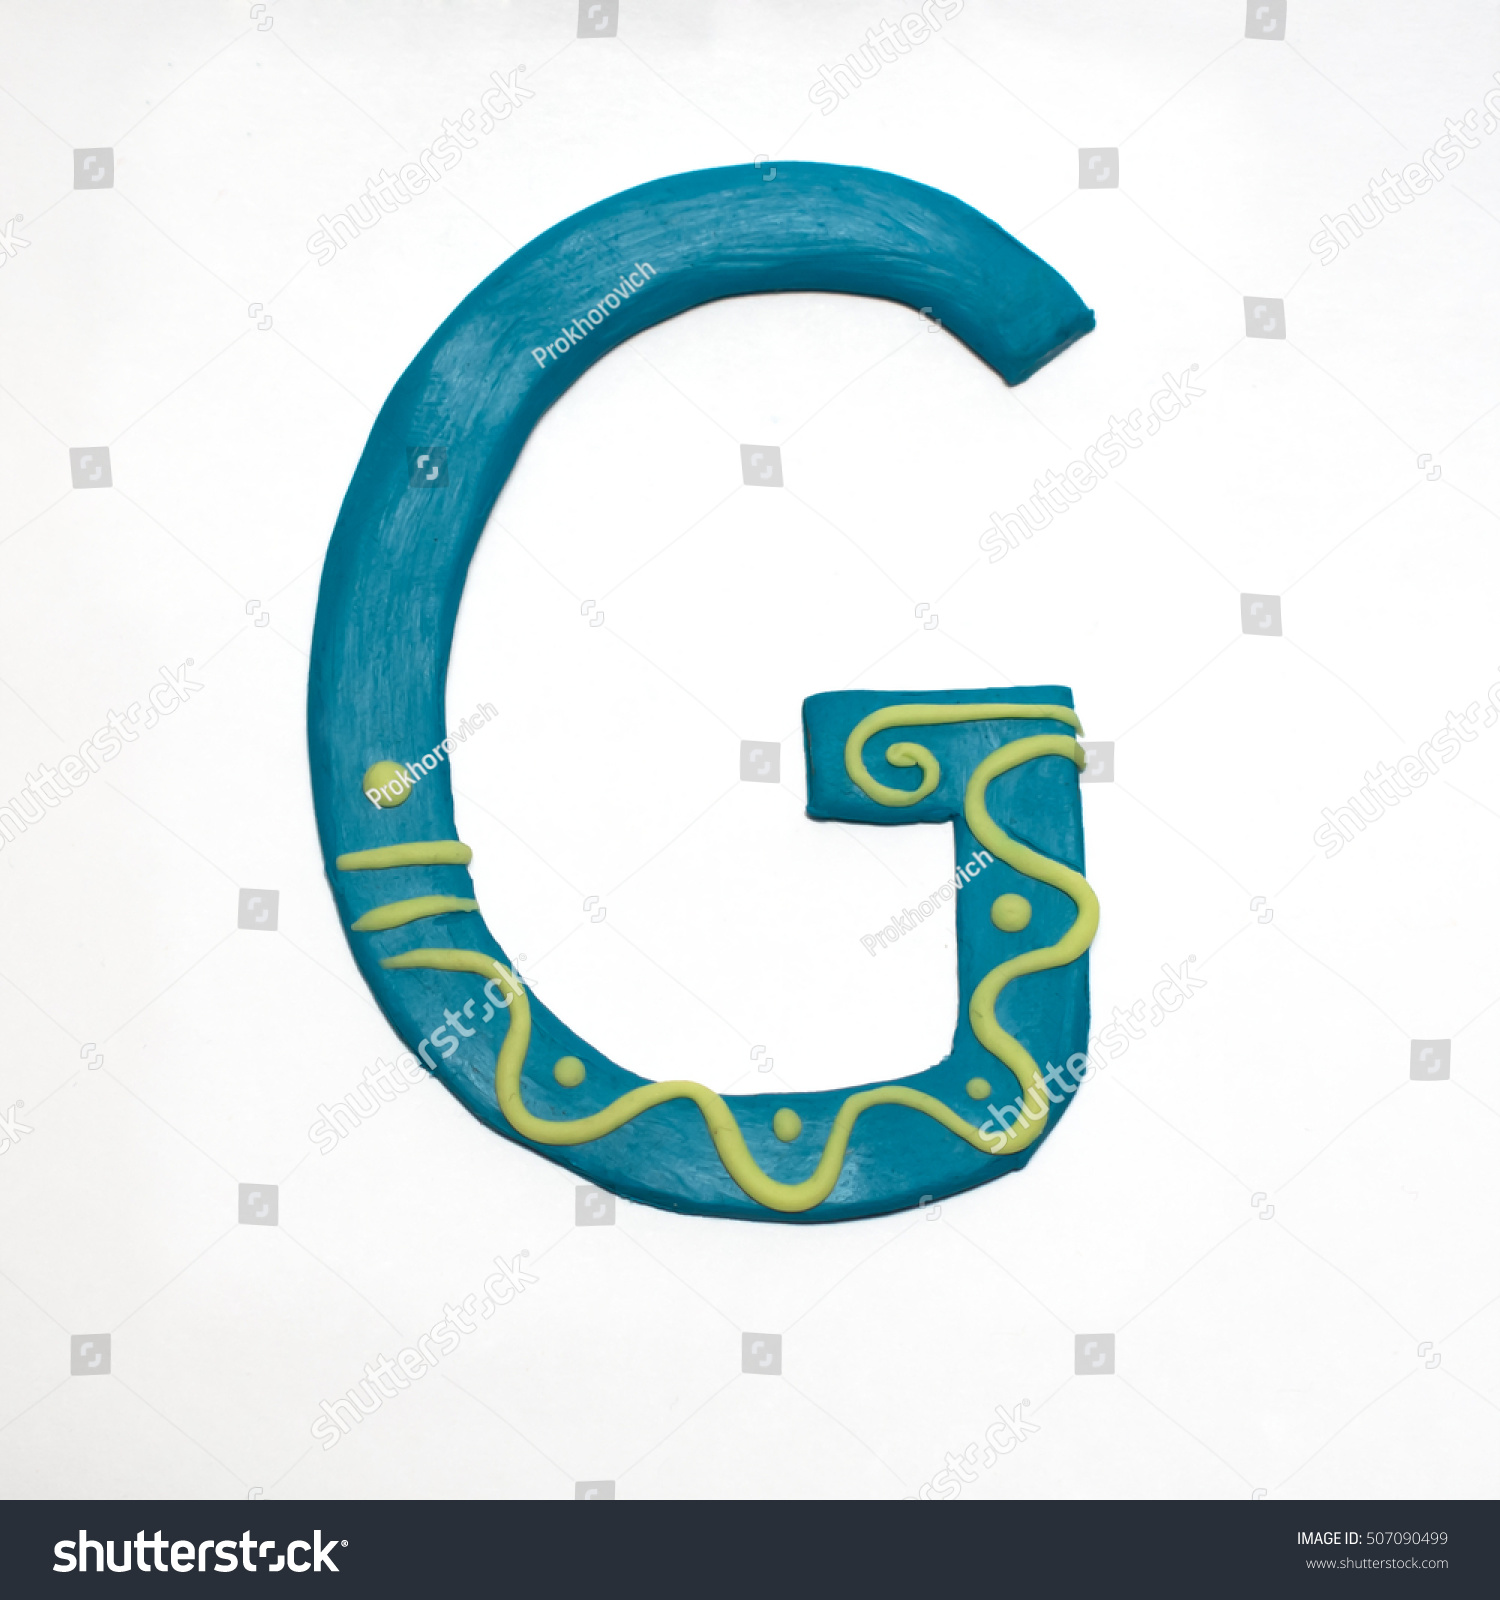 
Colorful font fashioned from clay. Letter "G". Isolated letter on a white background. #507090499